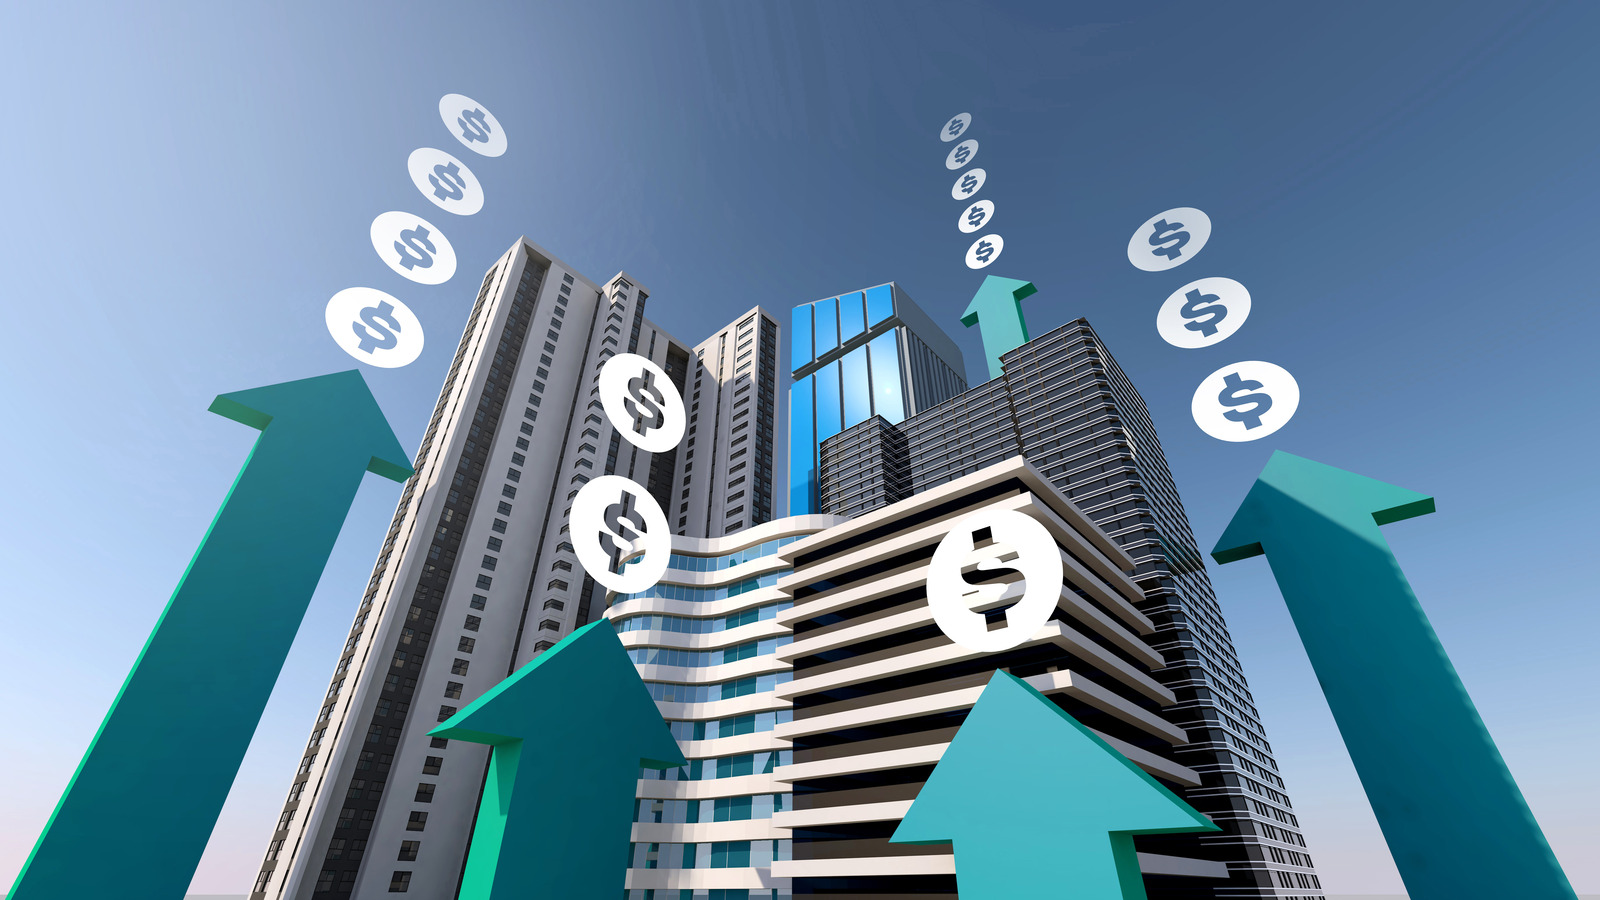 what are the advantages of investing in commercial properties over other kinds of real estate